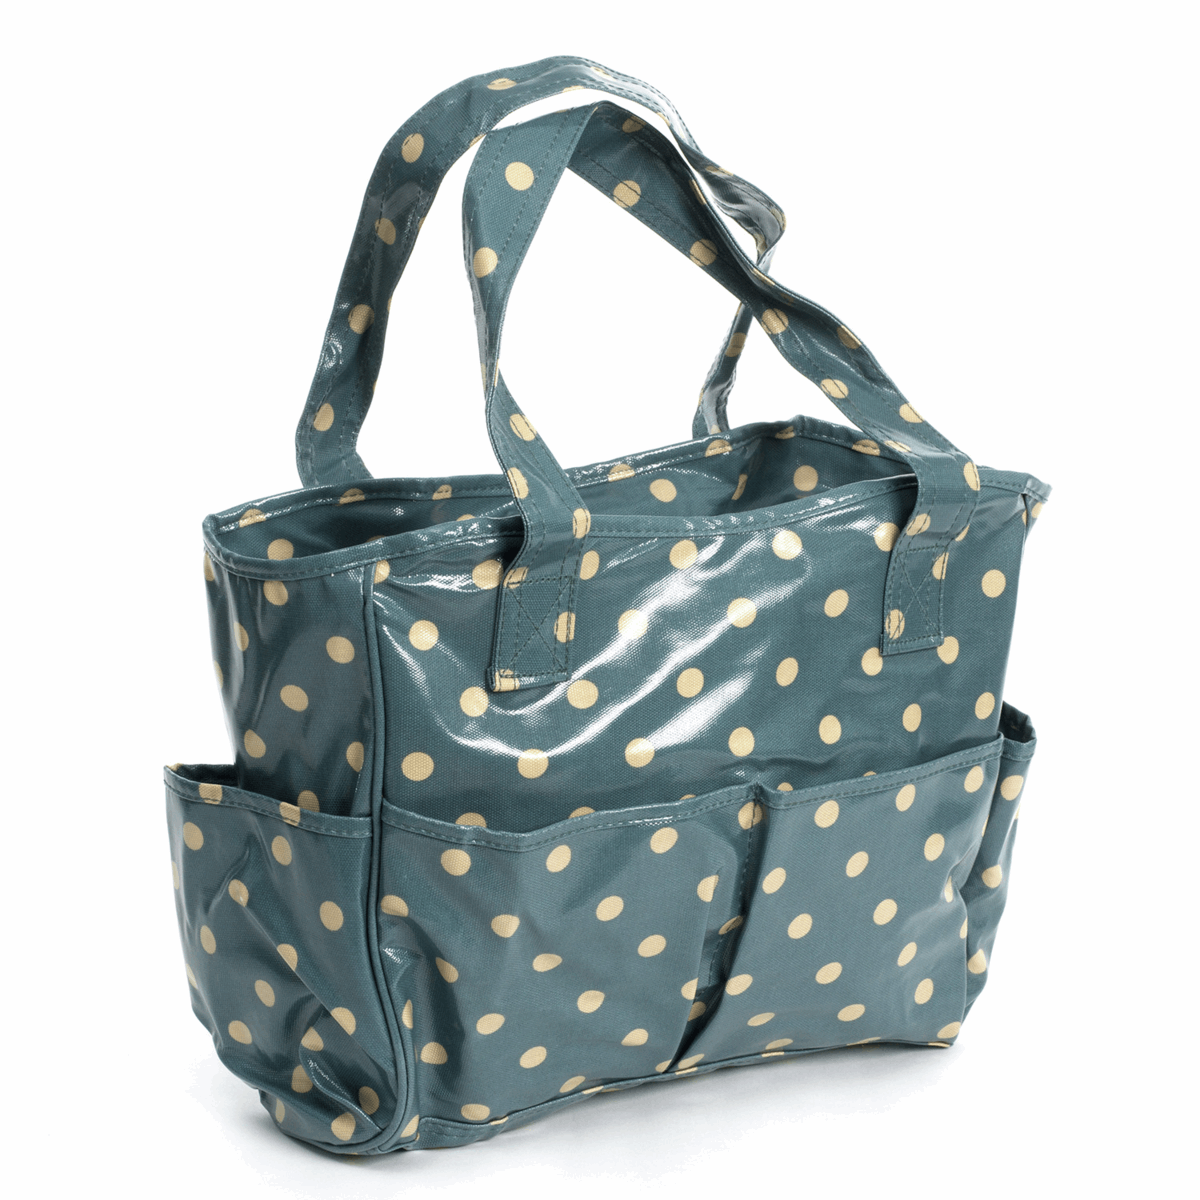 Deluxe Craft Bag - Blue Spot (Glossy PVC)